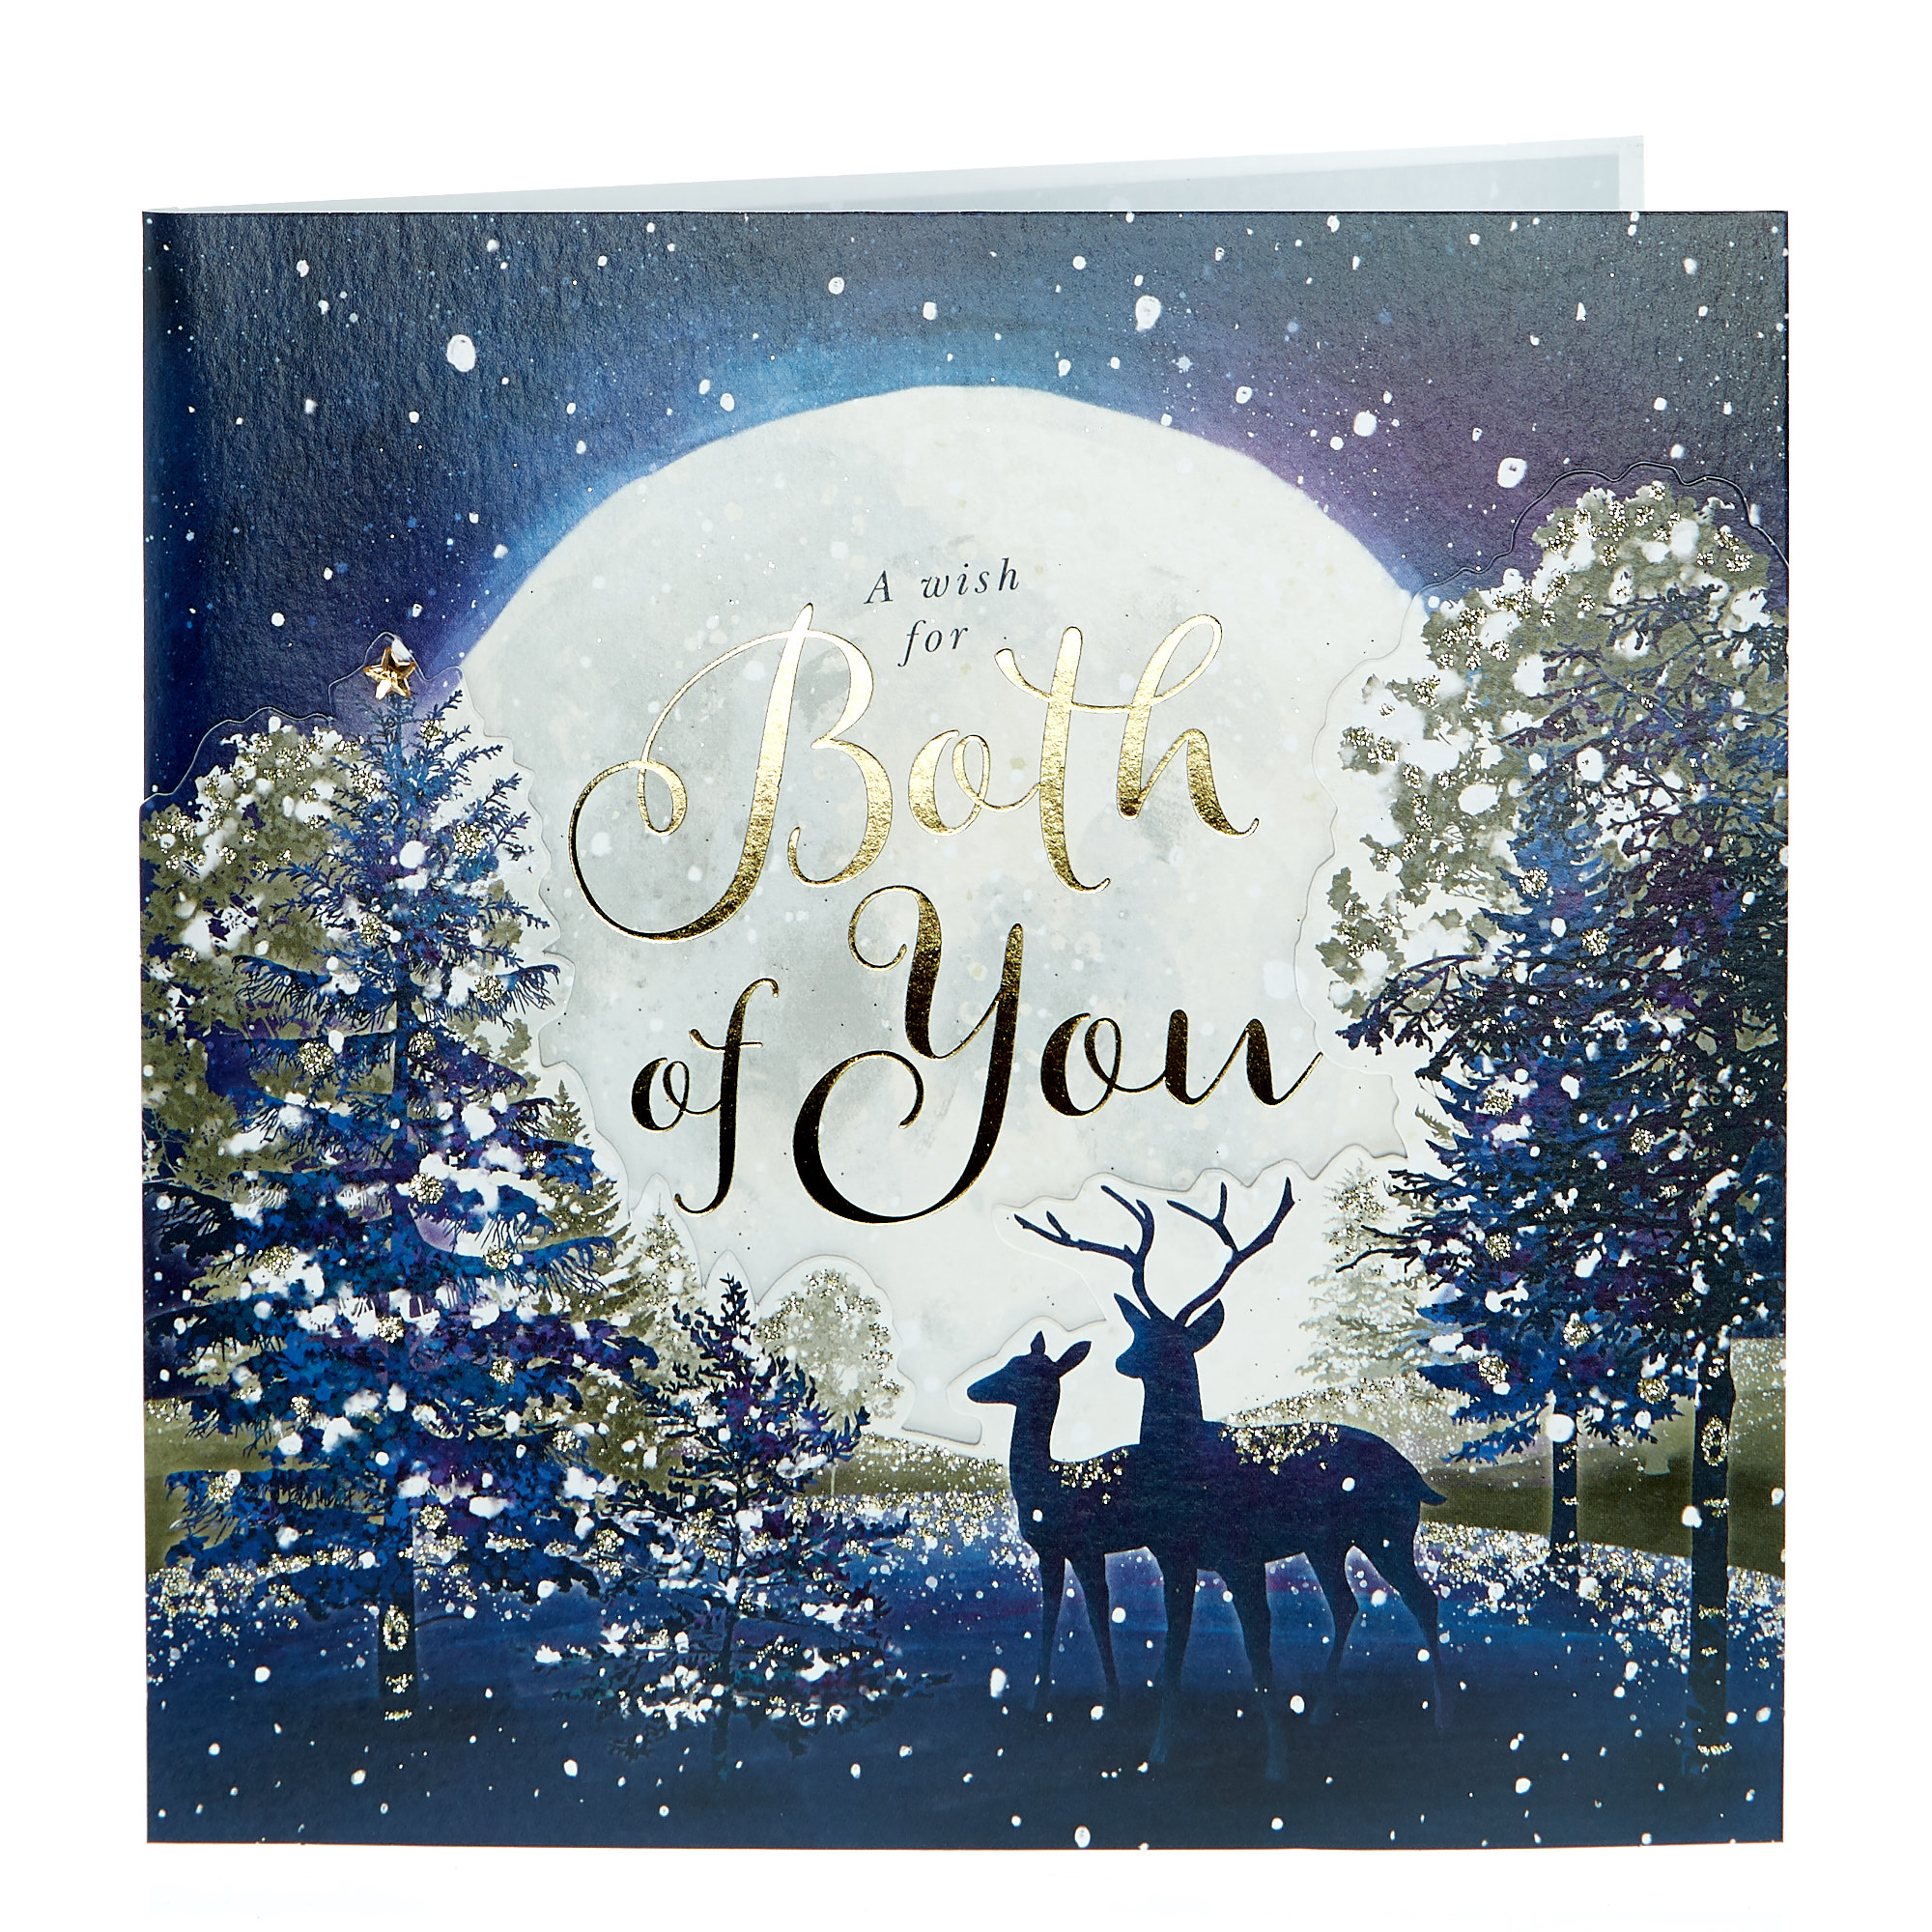 Exquisite Collection Christmas Card - A Wish For Both of You